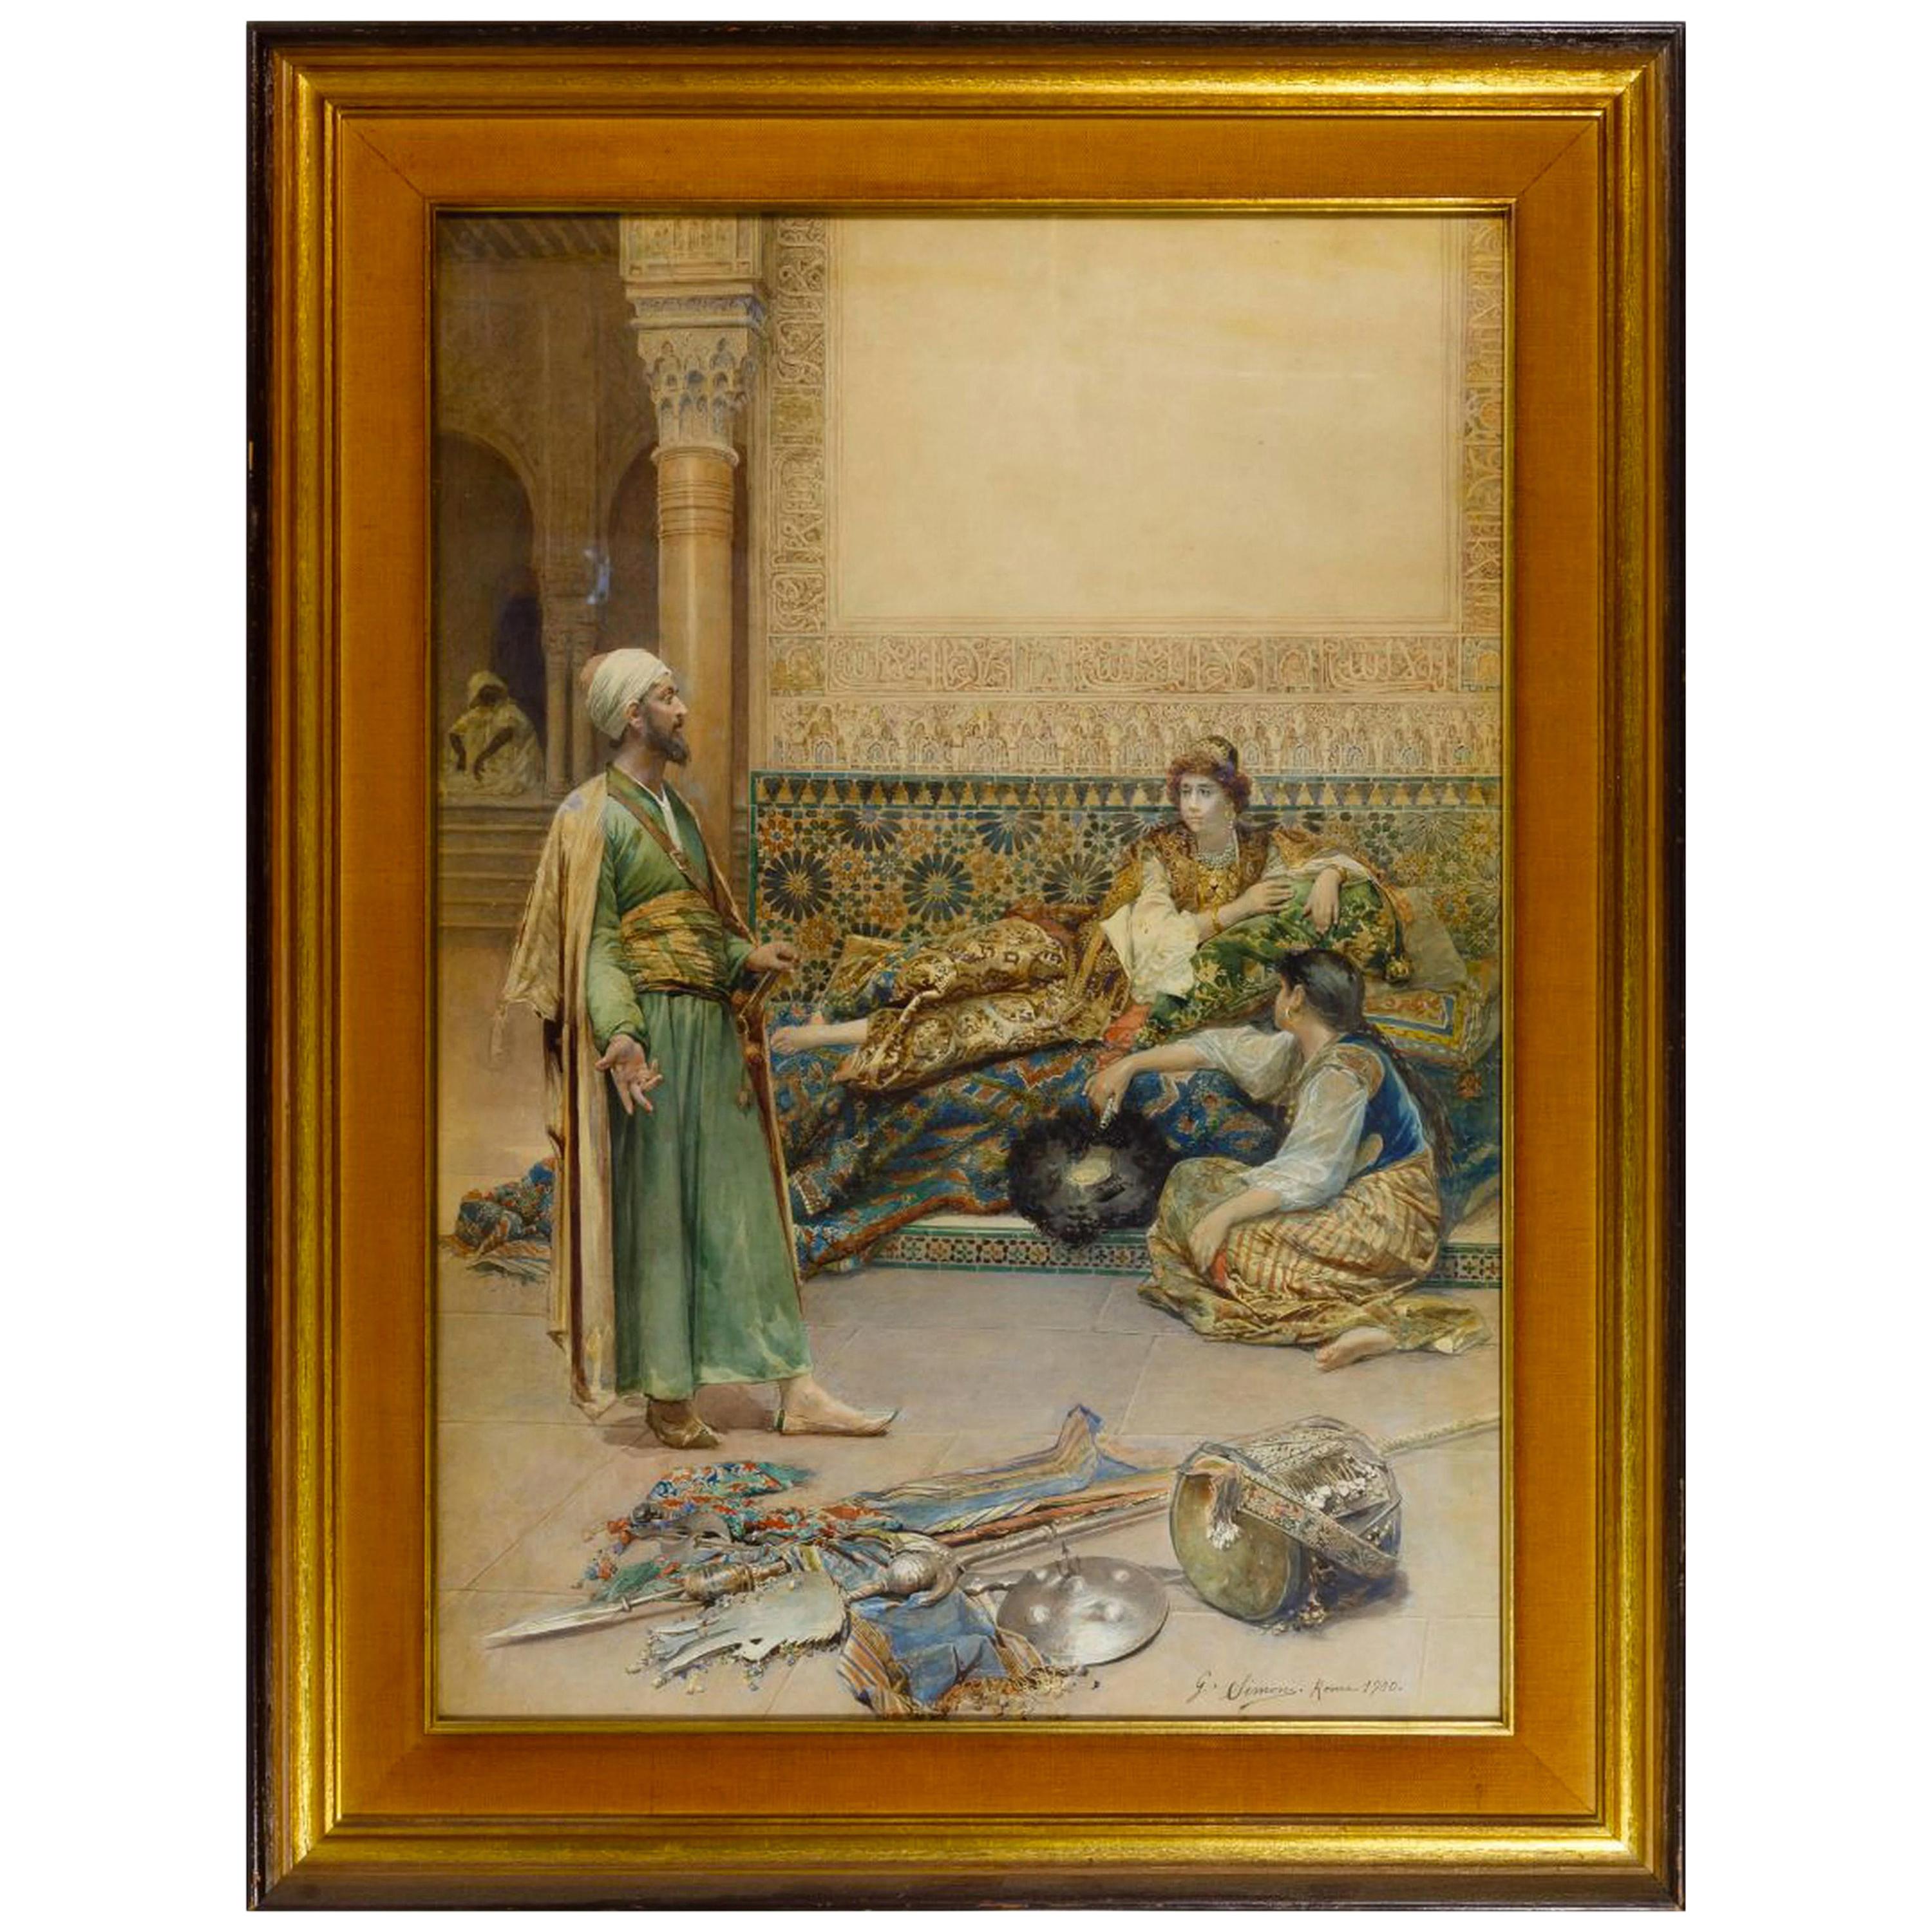 Fine Quality Watercolor Painting Depicting a Persian Scene by Gustavo Simoni